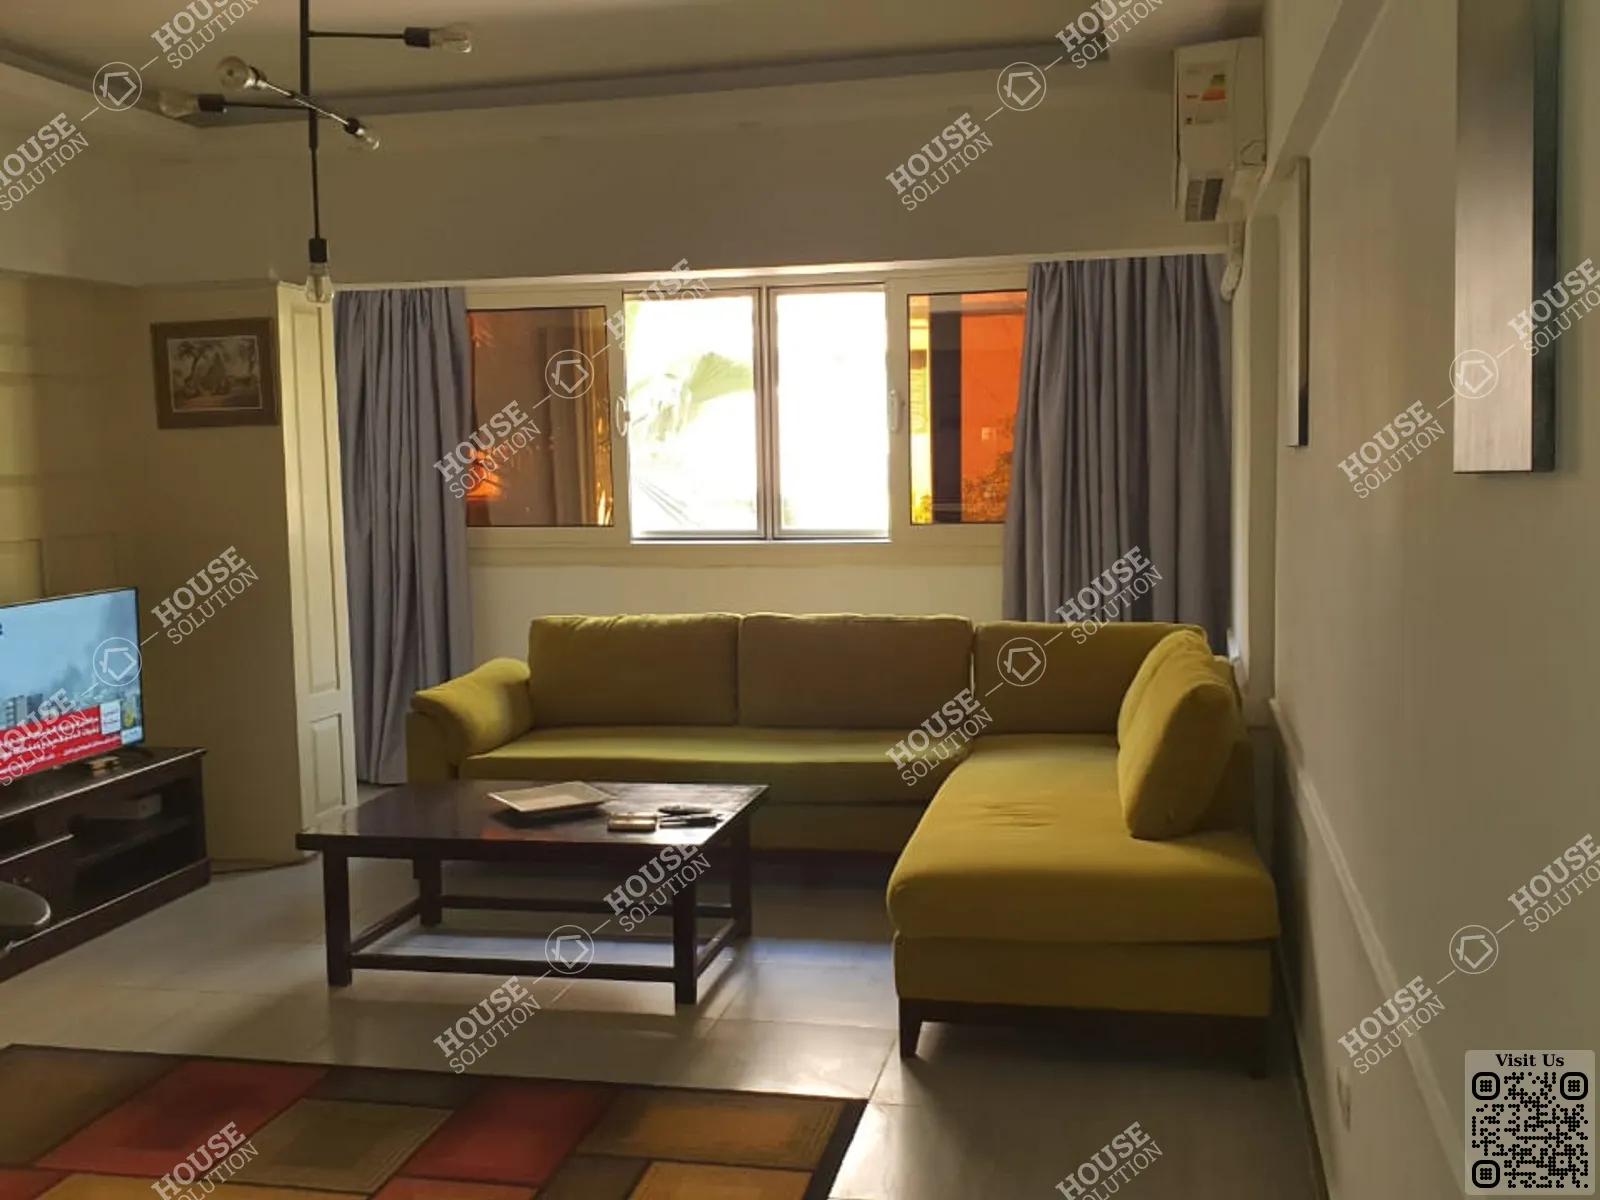 RECEPTION  @ Apartments For Rent In Maadi Maadi Degla Area: 100 m² consists of 2 Bedrooms 2 Bathrooms Furnished 5 stars #4915-0